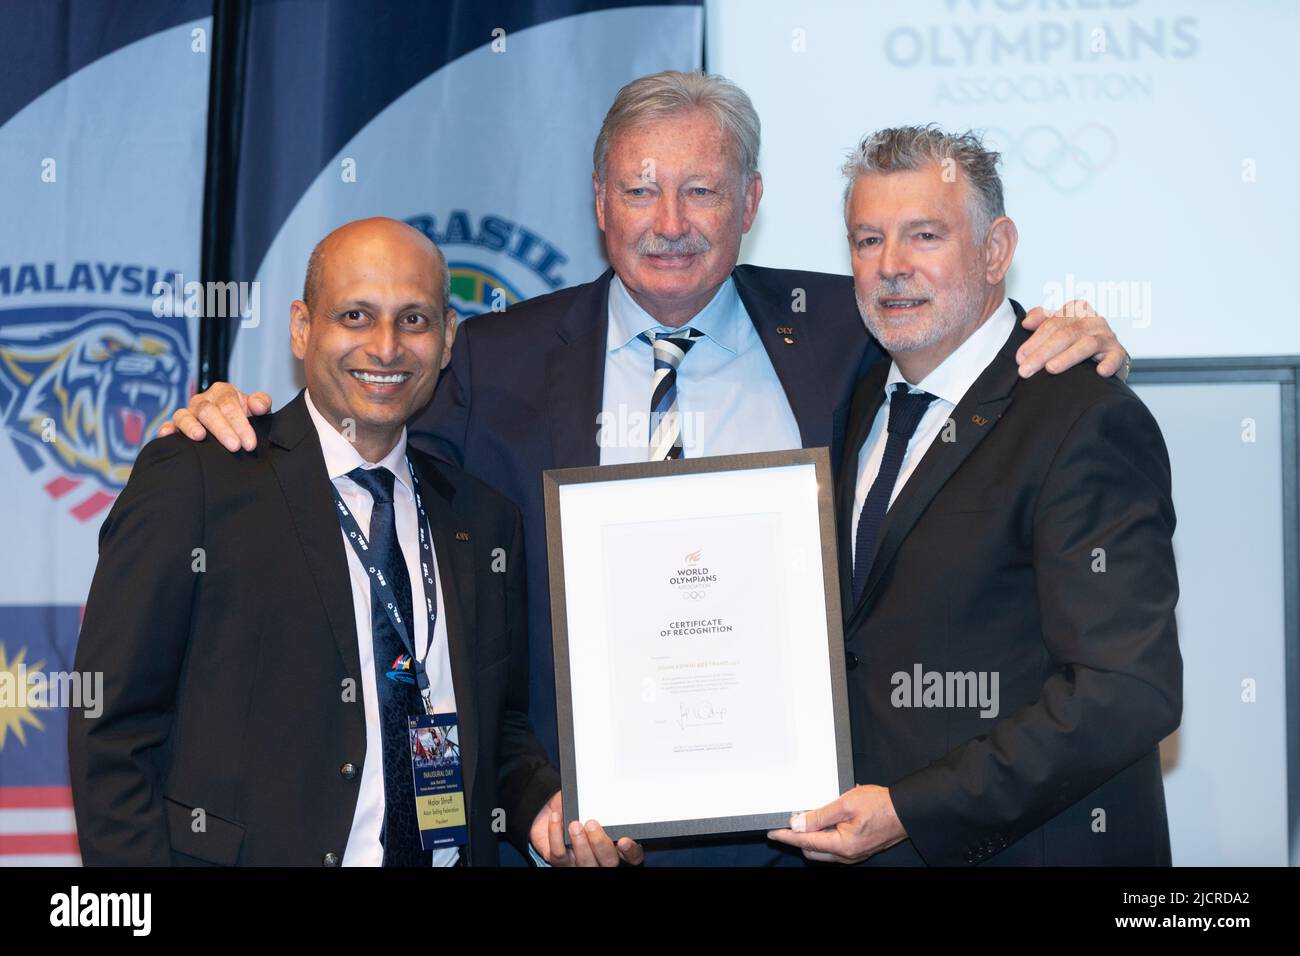 Lausanne, Switzerland. 13th June, 2022. John Bertrand from Australia (in the middle) received the 'World Olympians' certificate for having won several competitions including the famous America's Cup in 1983, on his right is Mr. Joel Bouzout (a French sportsman, world champion in 1987 in modern pentathlon) and on his left the Indian Malov Shroff (the President of the Asian Sailing Federation) during the prize-giving ceremony to announce the 1st World Cup of Sailing Football. (Photo by Eric Dubost/Pacific Press) Credit: Pacific Press Media Production Corp./Alamy Live News Stock Photo